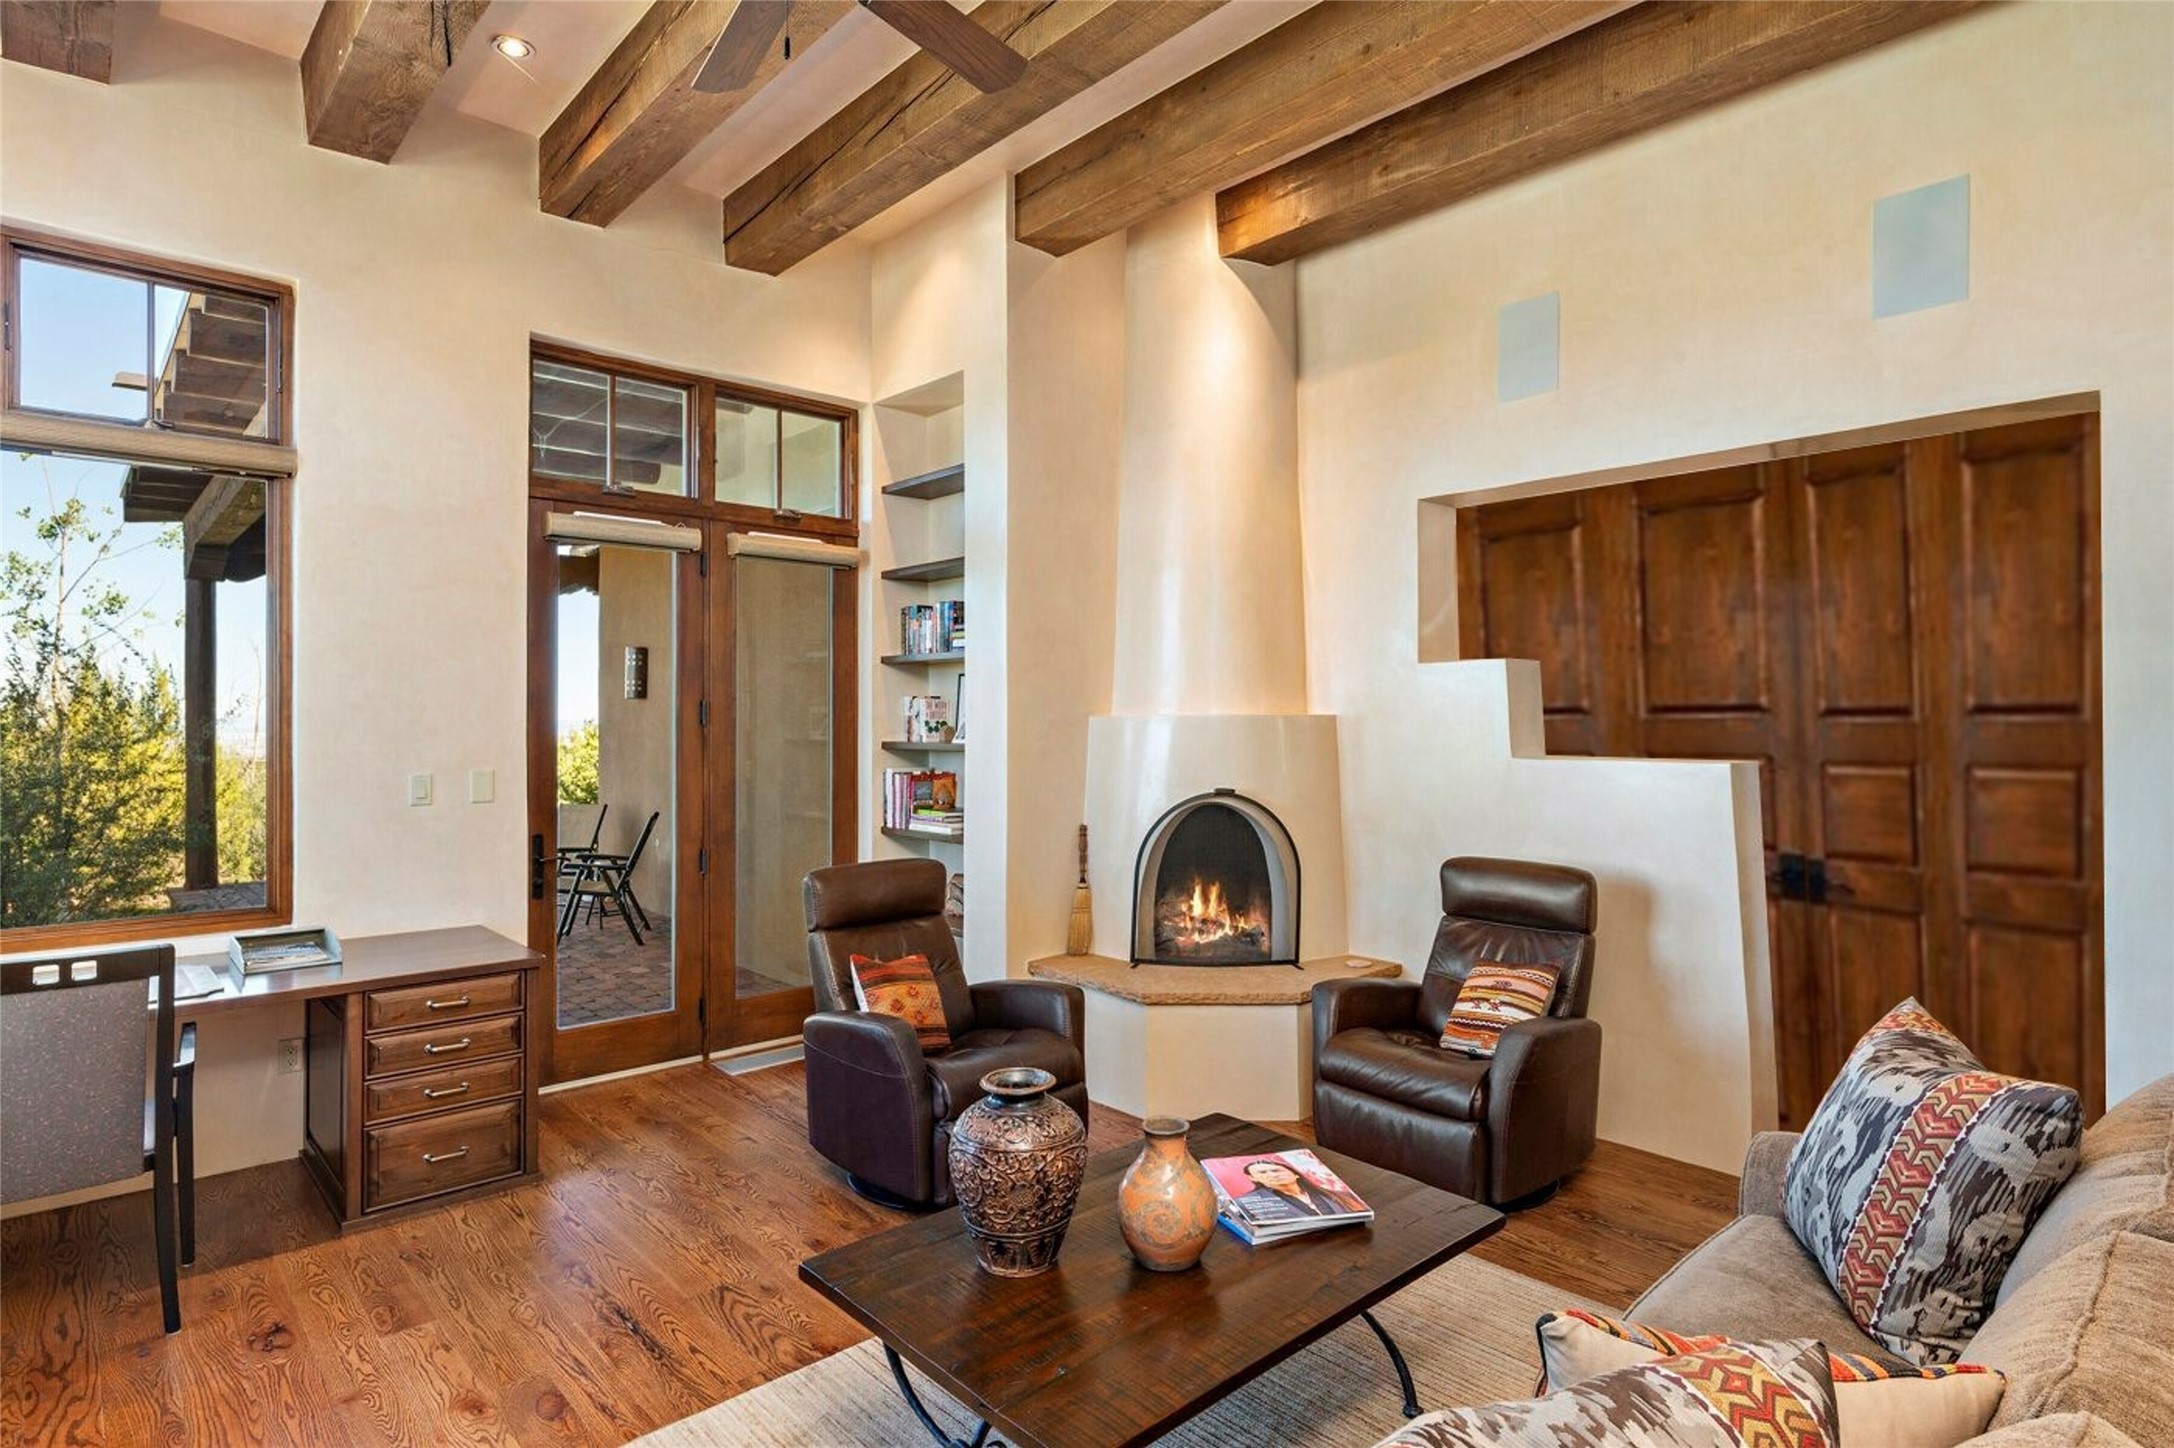 3353 and 3355 Spearpoint Knoll, Santa Fe, New Mexico 87506, 3 Bedrooms Bedrooms, ,3 BathroomsBathrooms,Residential,For Sale,3353 and 3355 Spearpoint Knoll,202232859